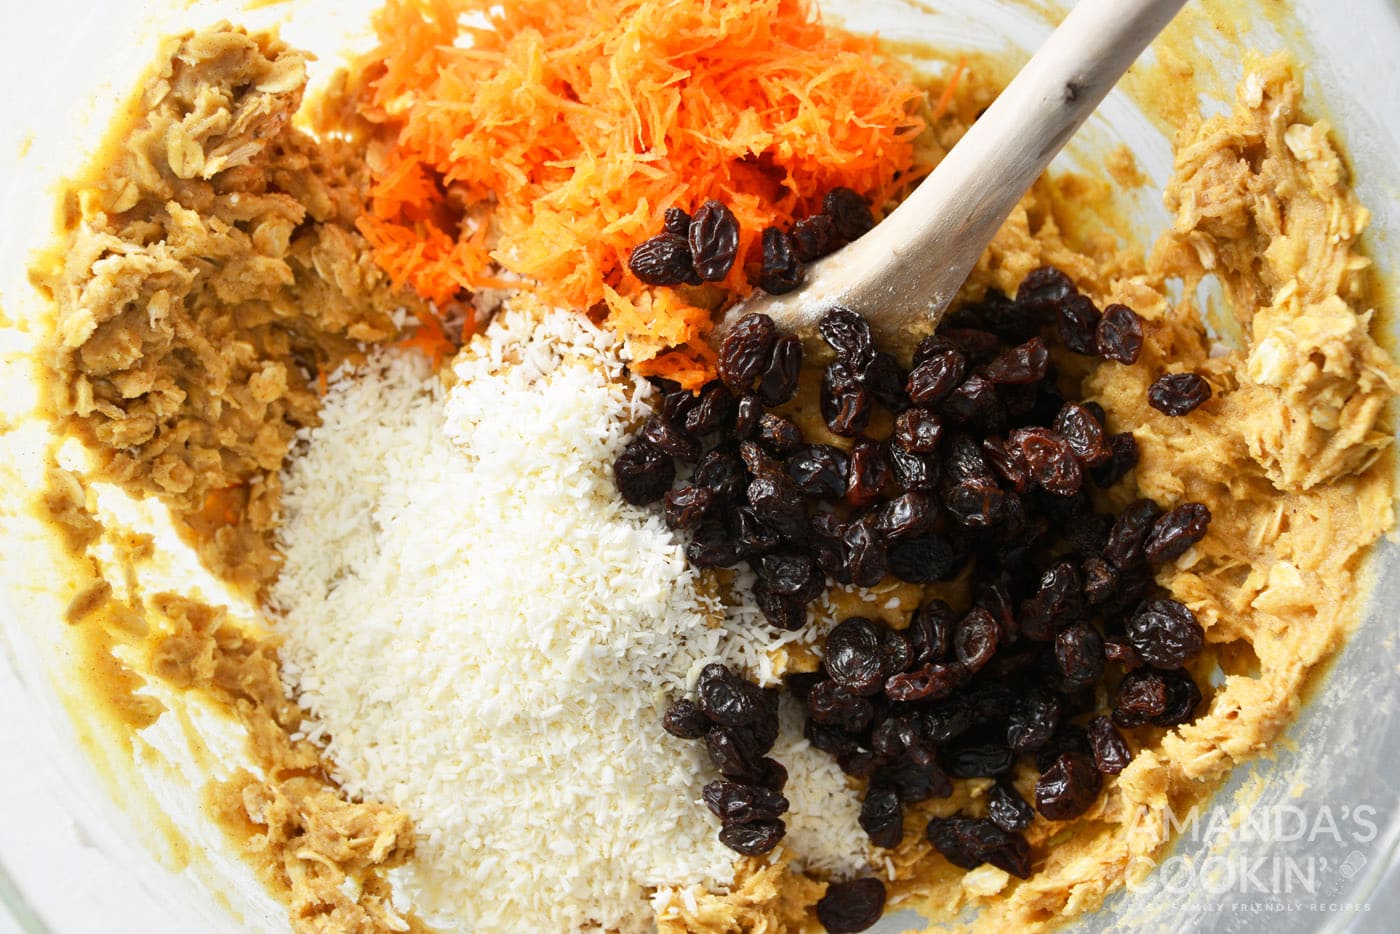 stiring in carrots, shredded coconut, and raisins to a bowl of cookie dough